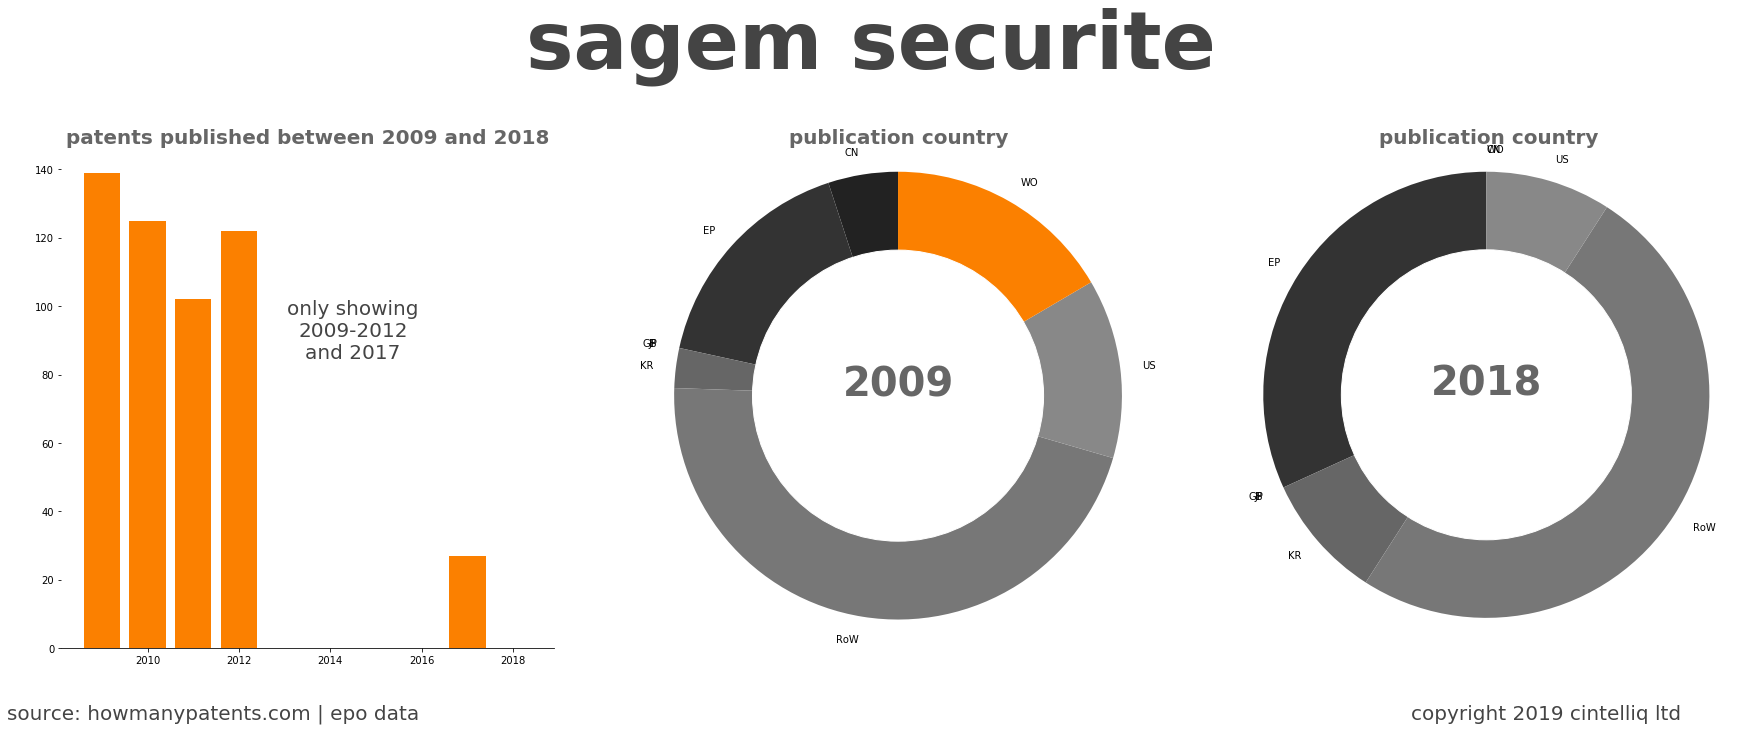 summary of patents for Sagem Securite